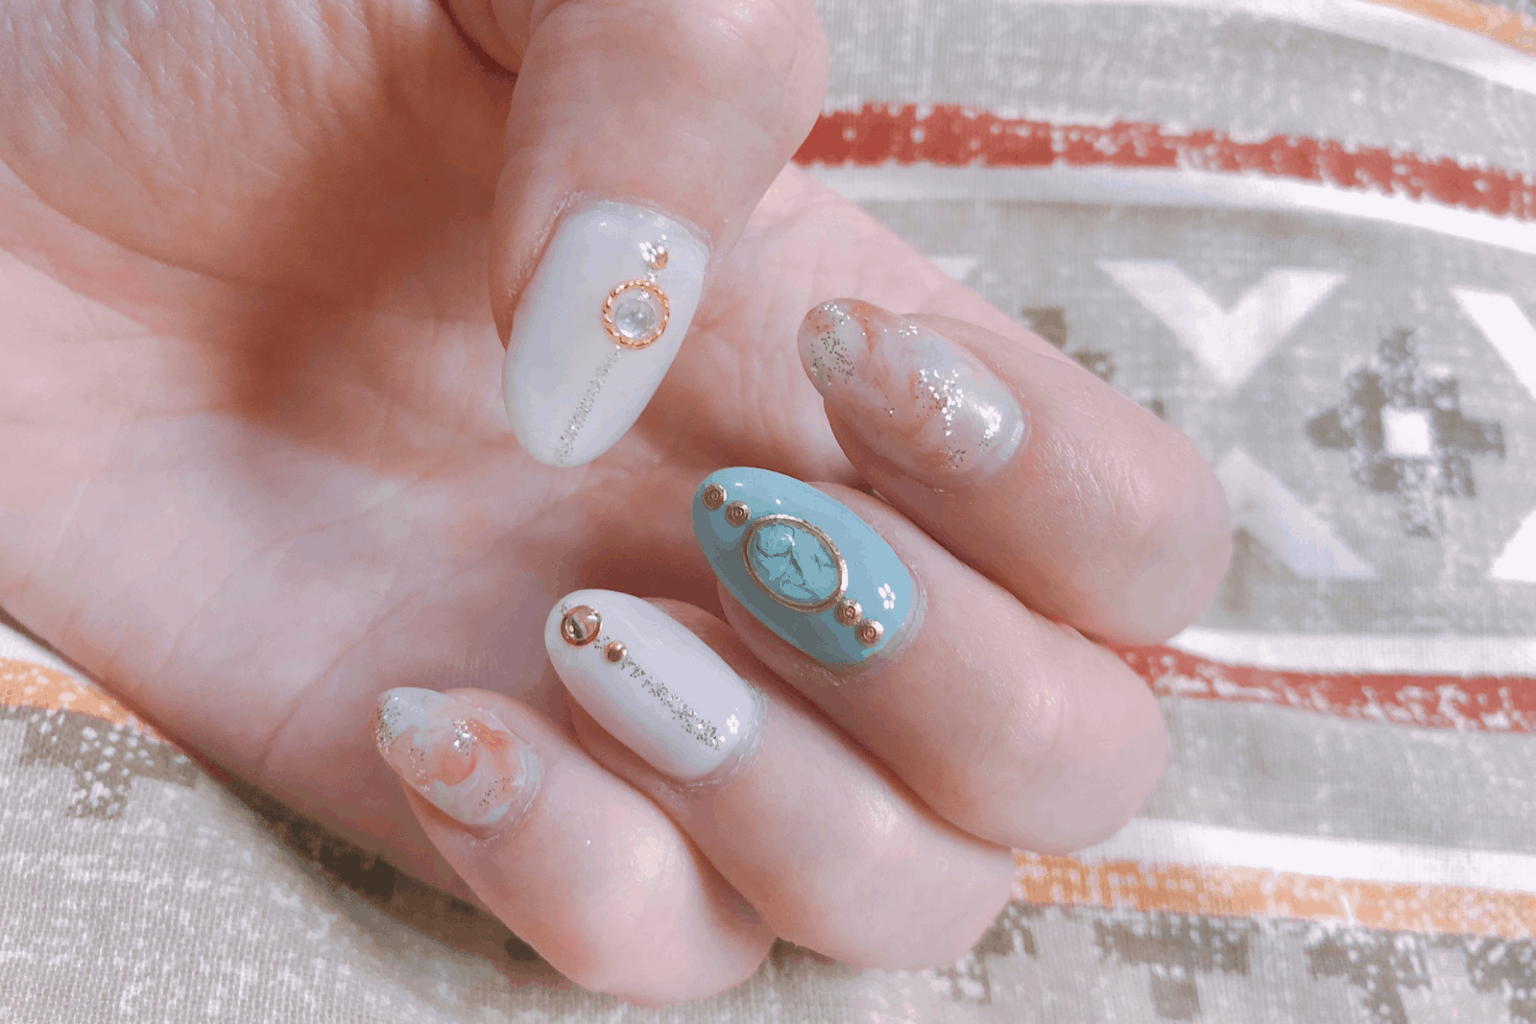 Getting a Mandala Nail Art Design: Tips for Doing it At Home